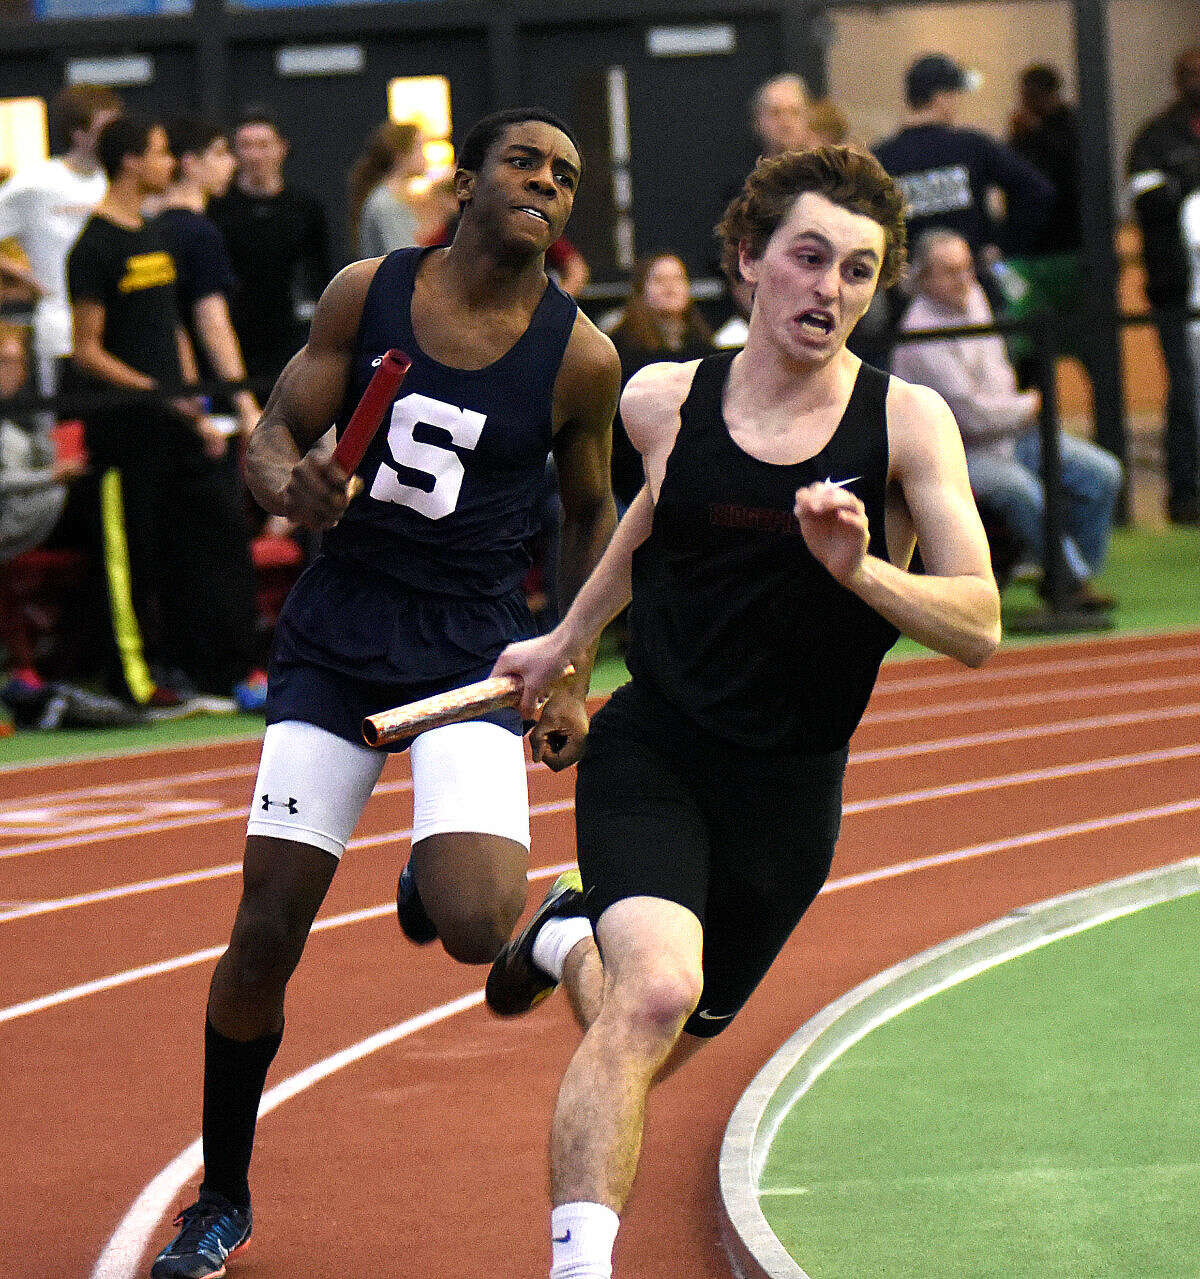 Hour photo/John Nash - Shots from Wednesday night's FCIAC Track and Field Championship meet held at The Floyd Little Center at Hillhouse High School in New Haven.